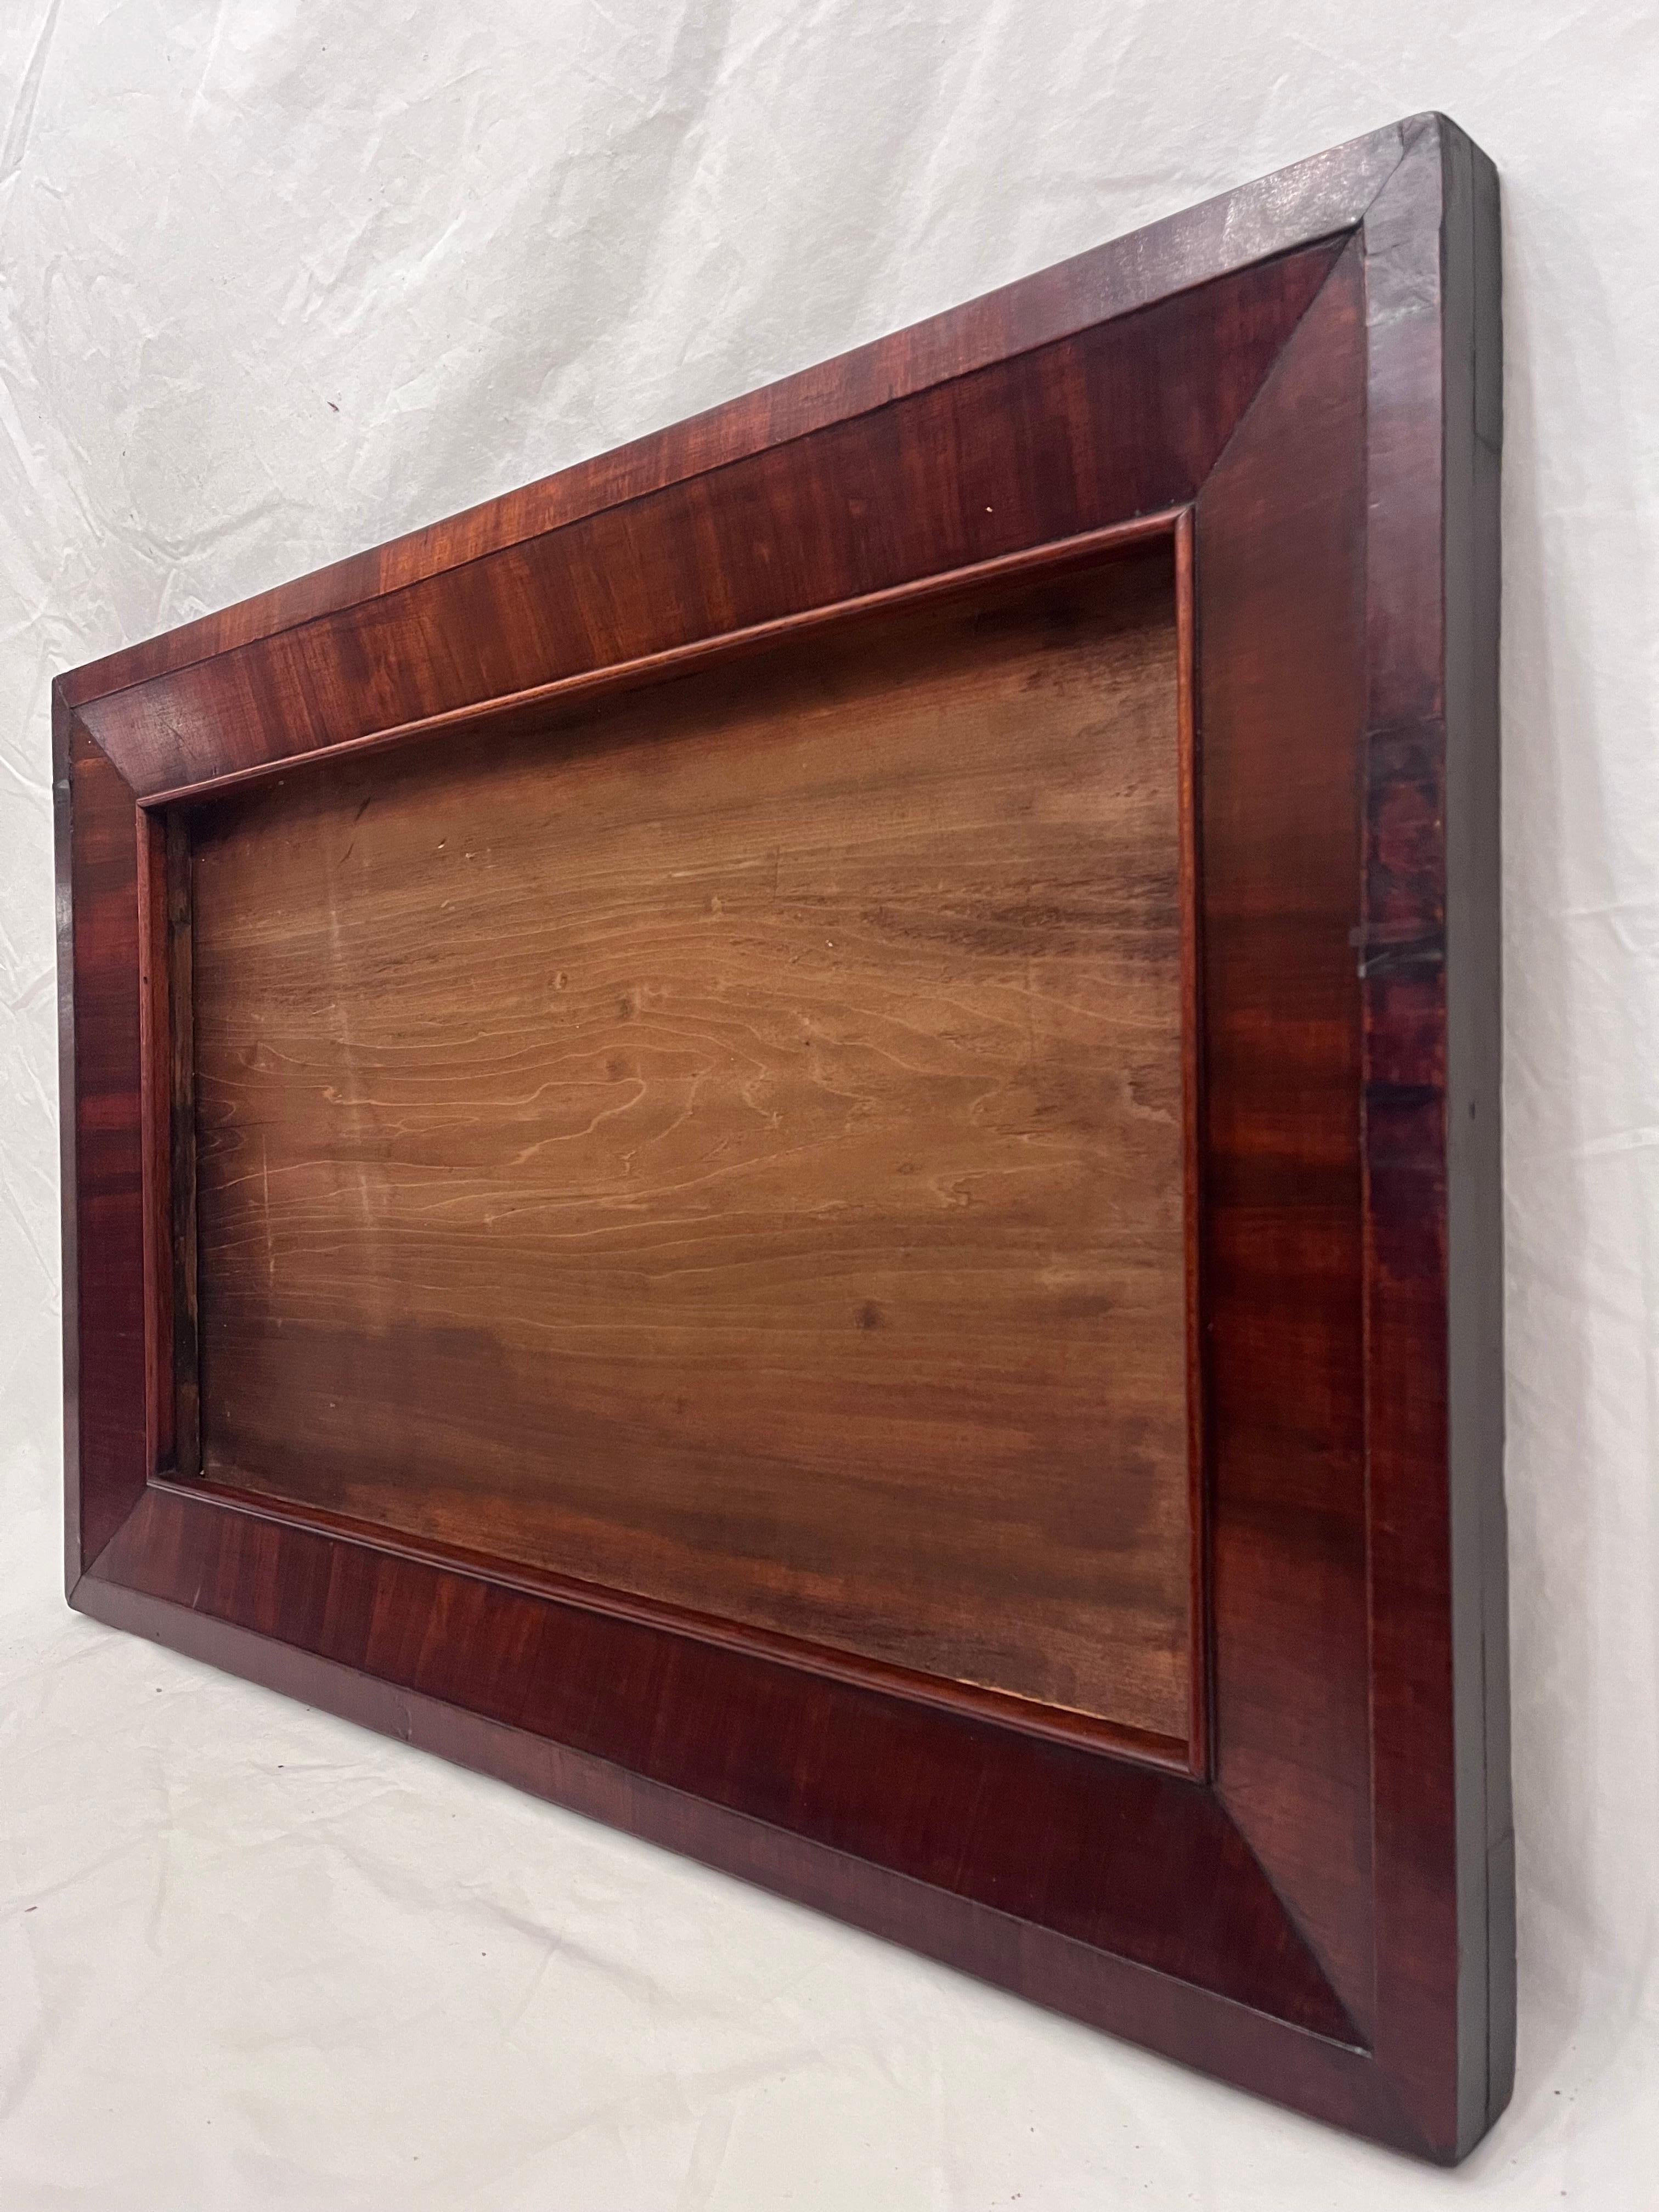 A beautiful and antique late 19th century circa 1870's American Empire style picture frame. The rabbet size (size that holds the art) is 26.25